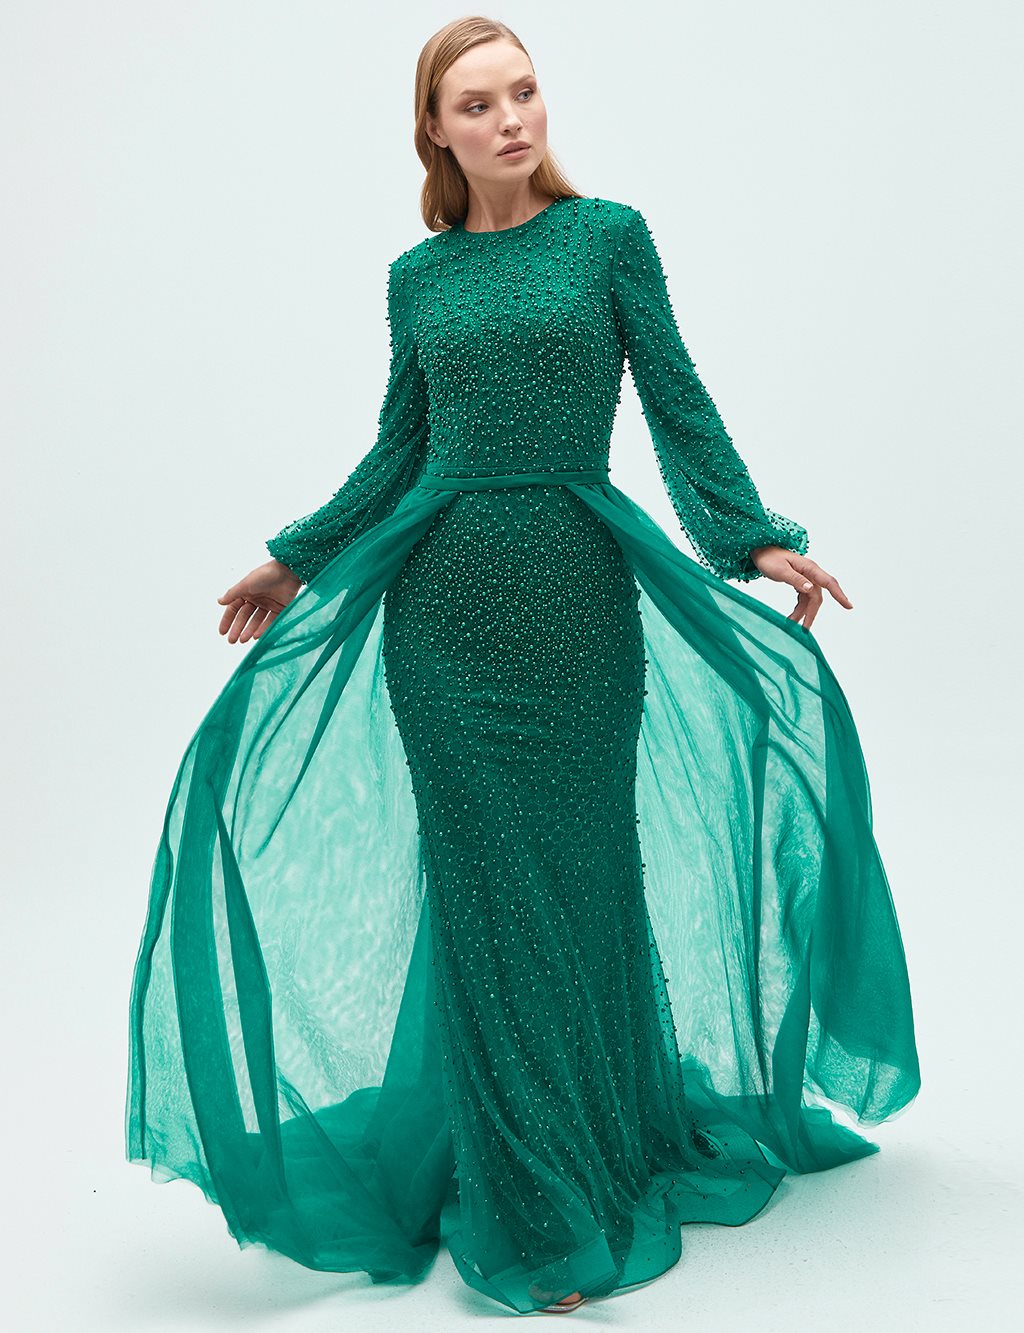 Pearl Embroidered Cape Evening Dress Emerald